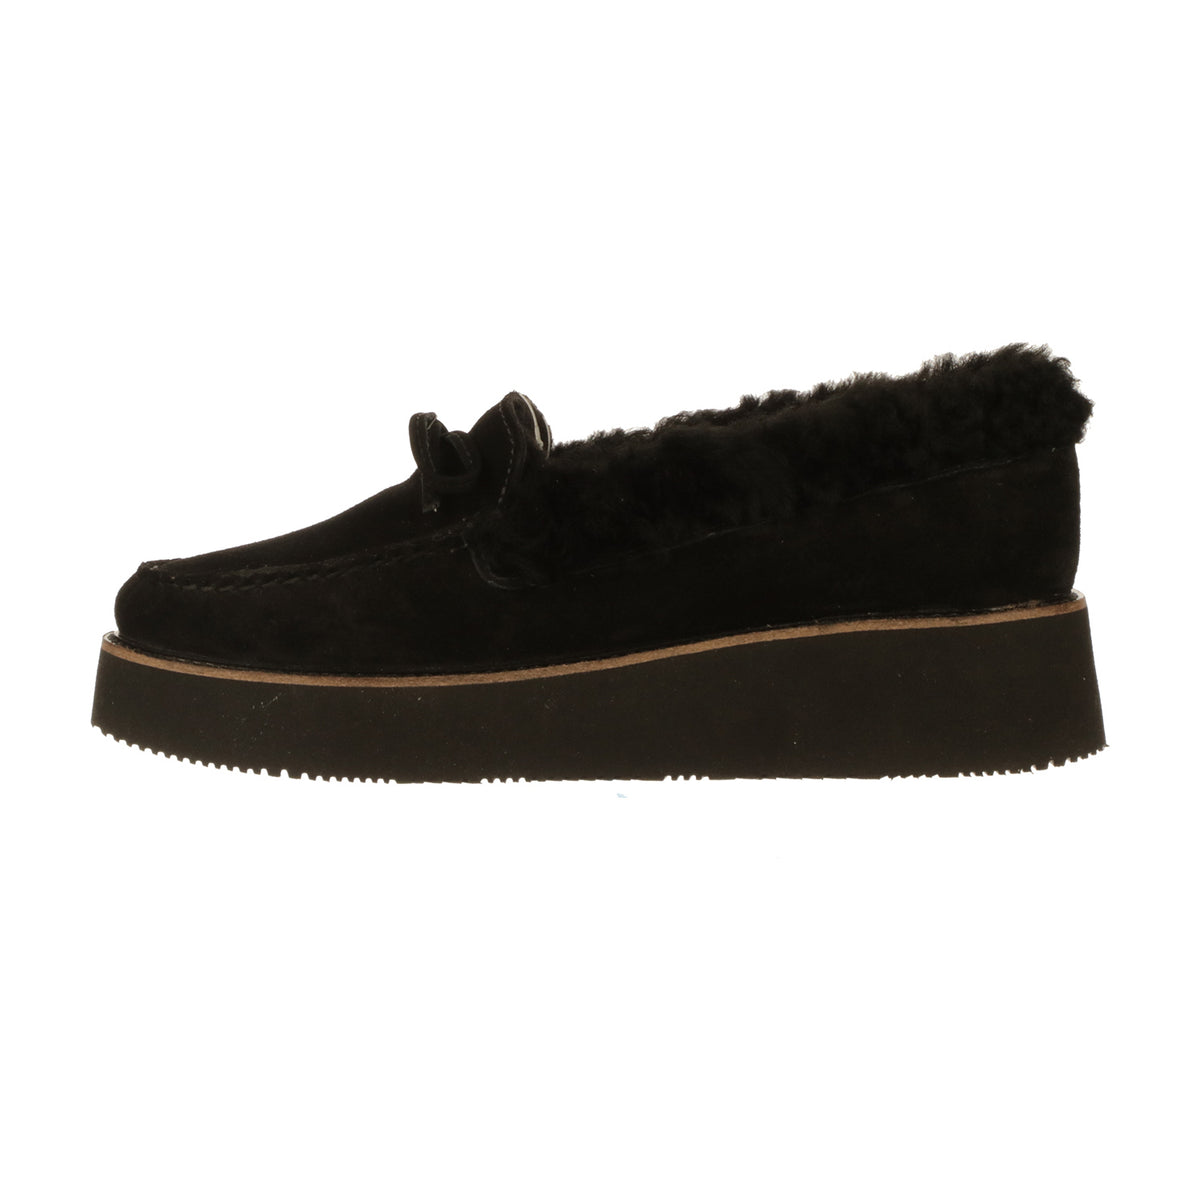 Shearling Wedge Moccasin :: Black